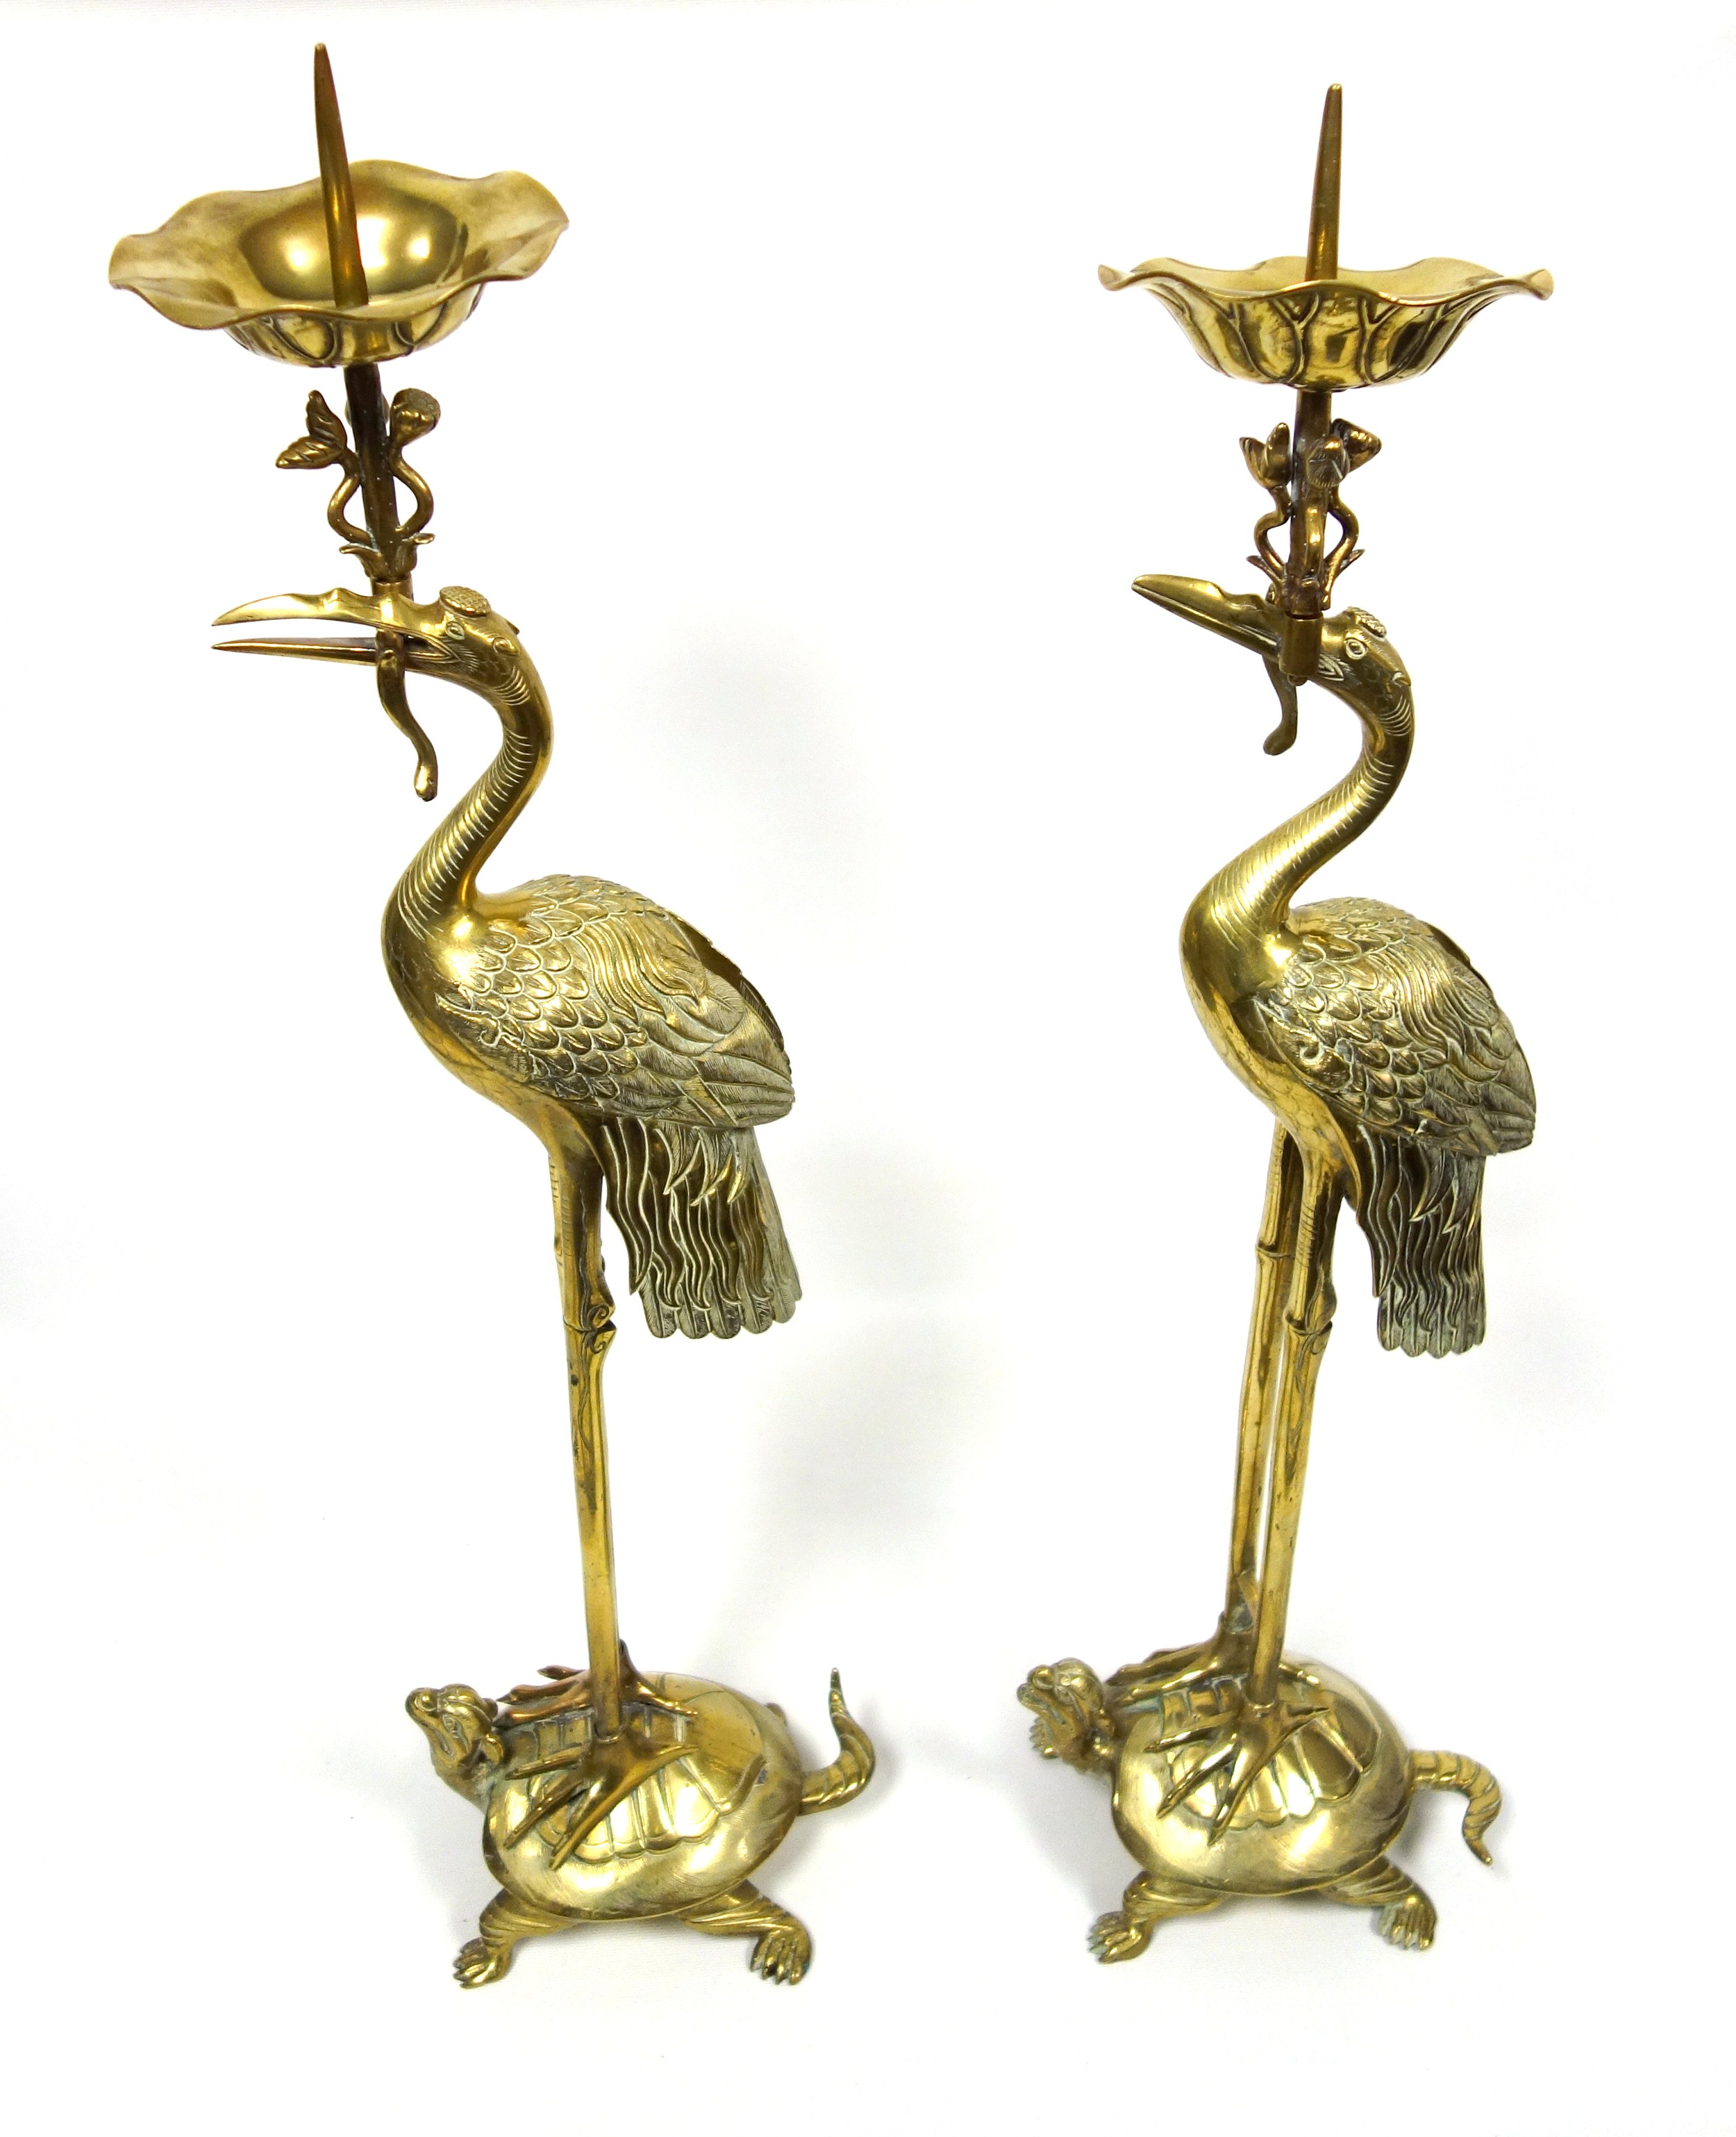 Pair of tall Japanese cranes, each supporting a pricket candle holder and standing on a tortoise,